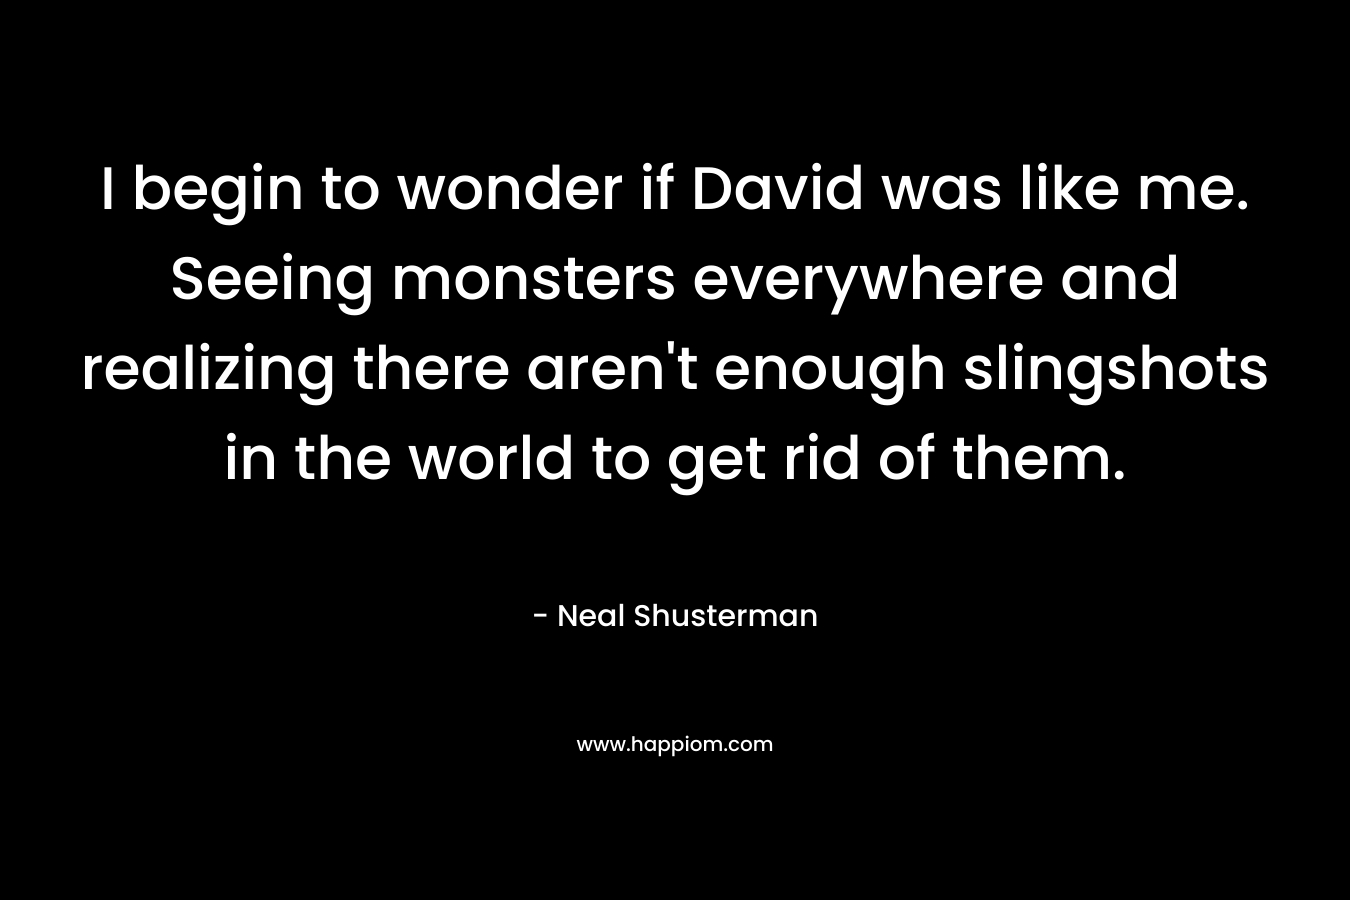 I begin to wonder if David was like me. Seeing monsters everywhere and realizing there aren’t enough slingshots in the world to get rid of them. – Neal Shusterman